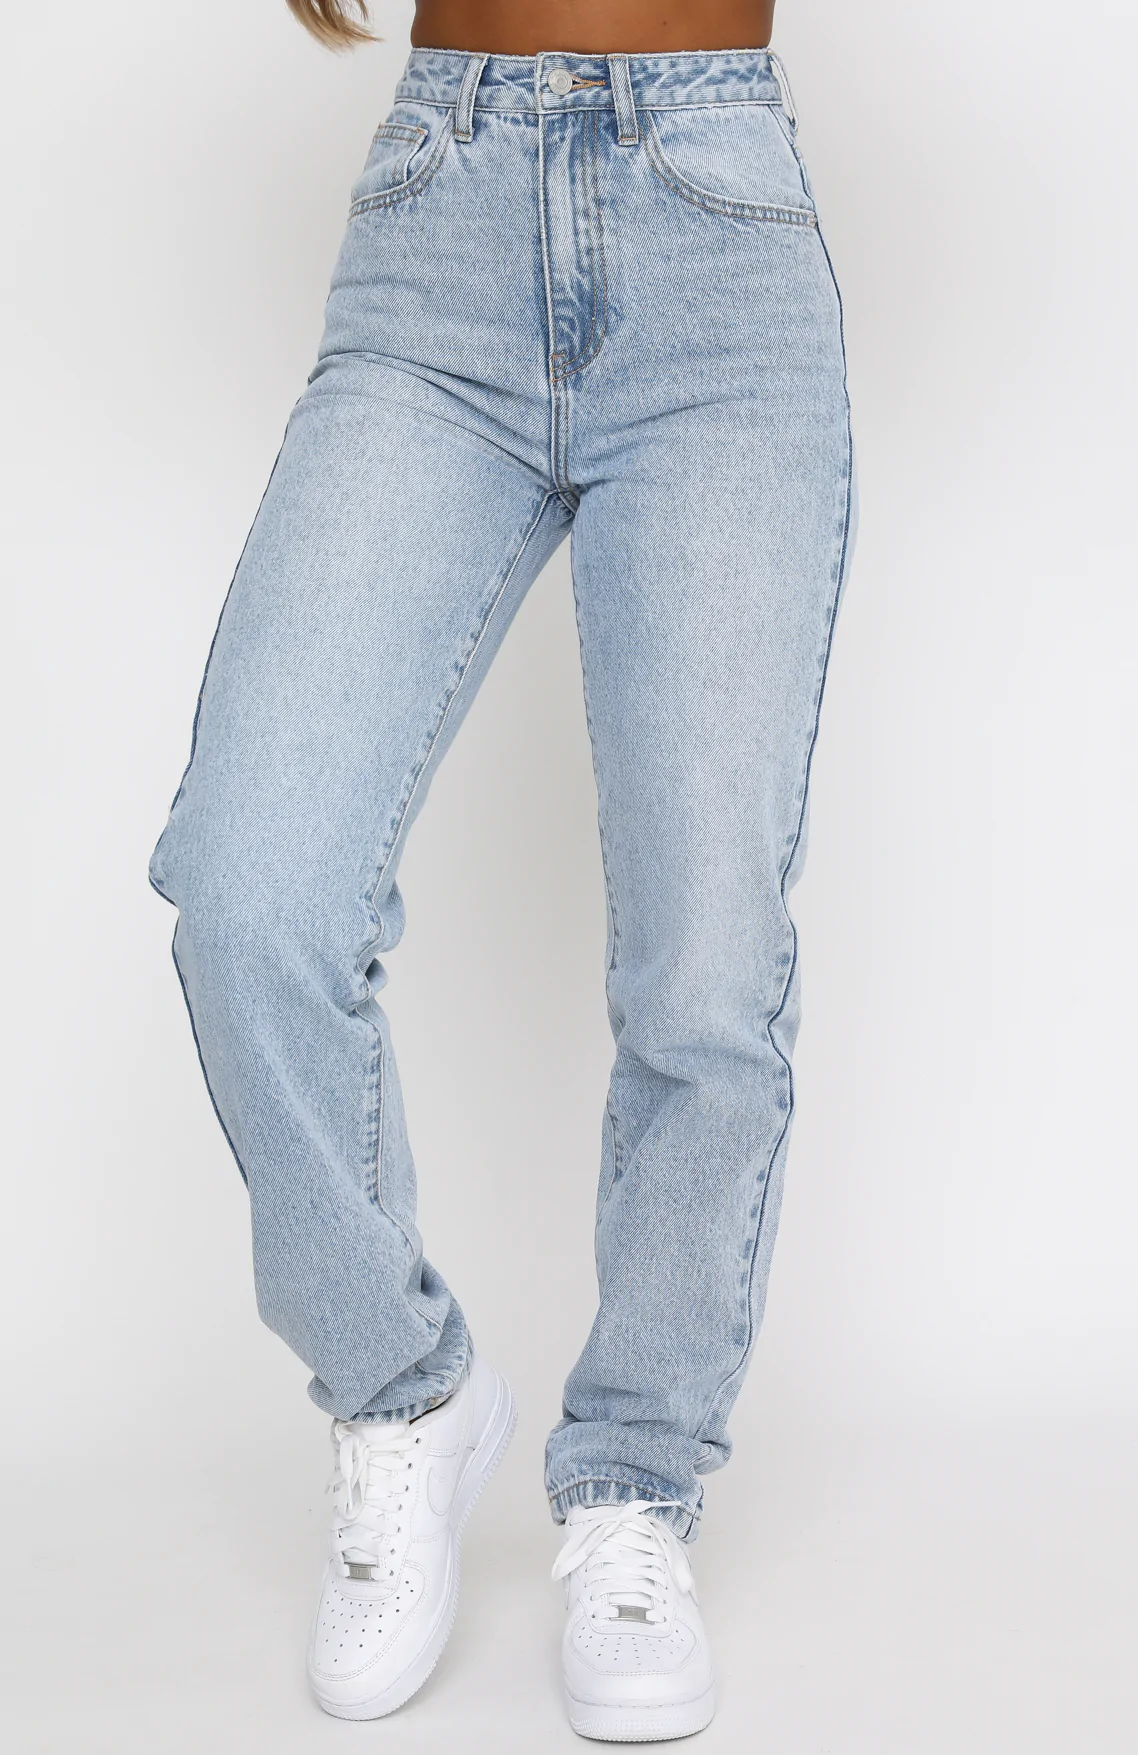 Check out the wide collection of Dr Denim jeans